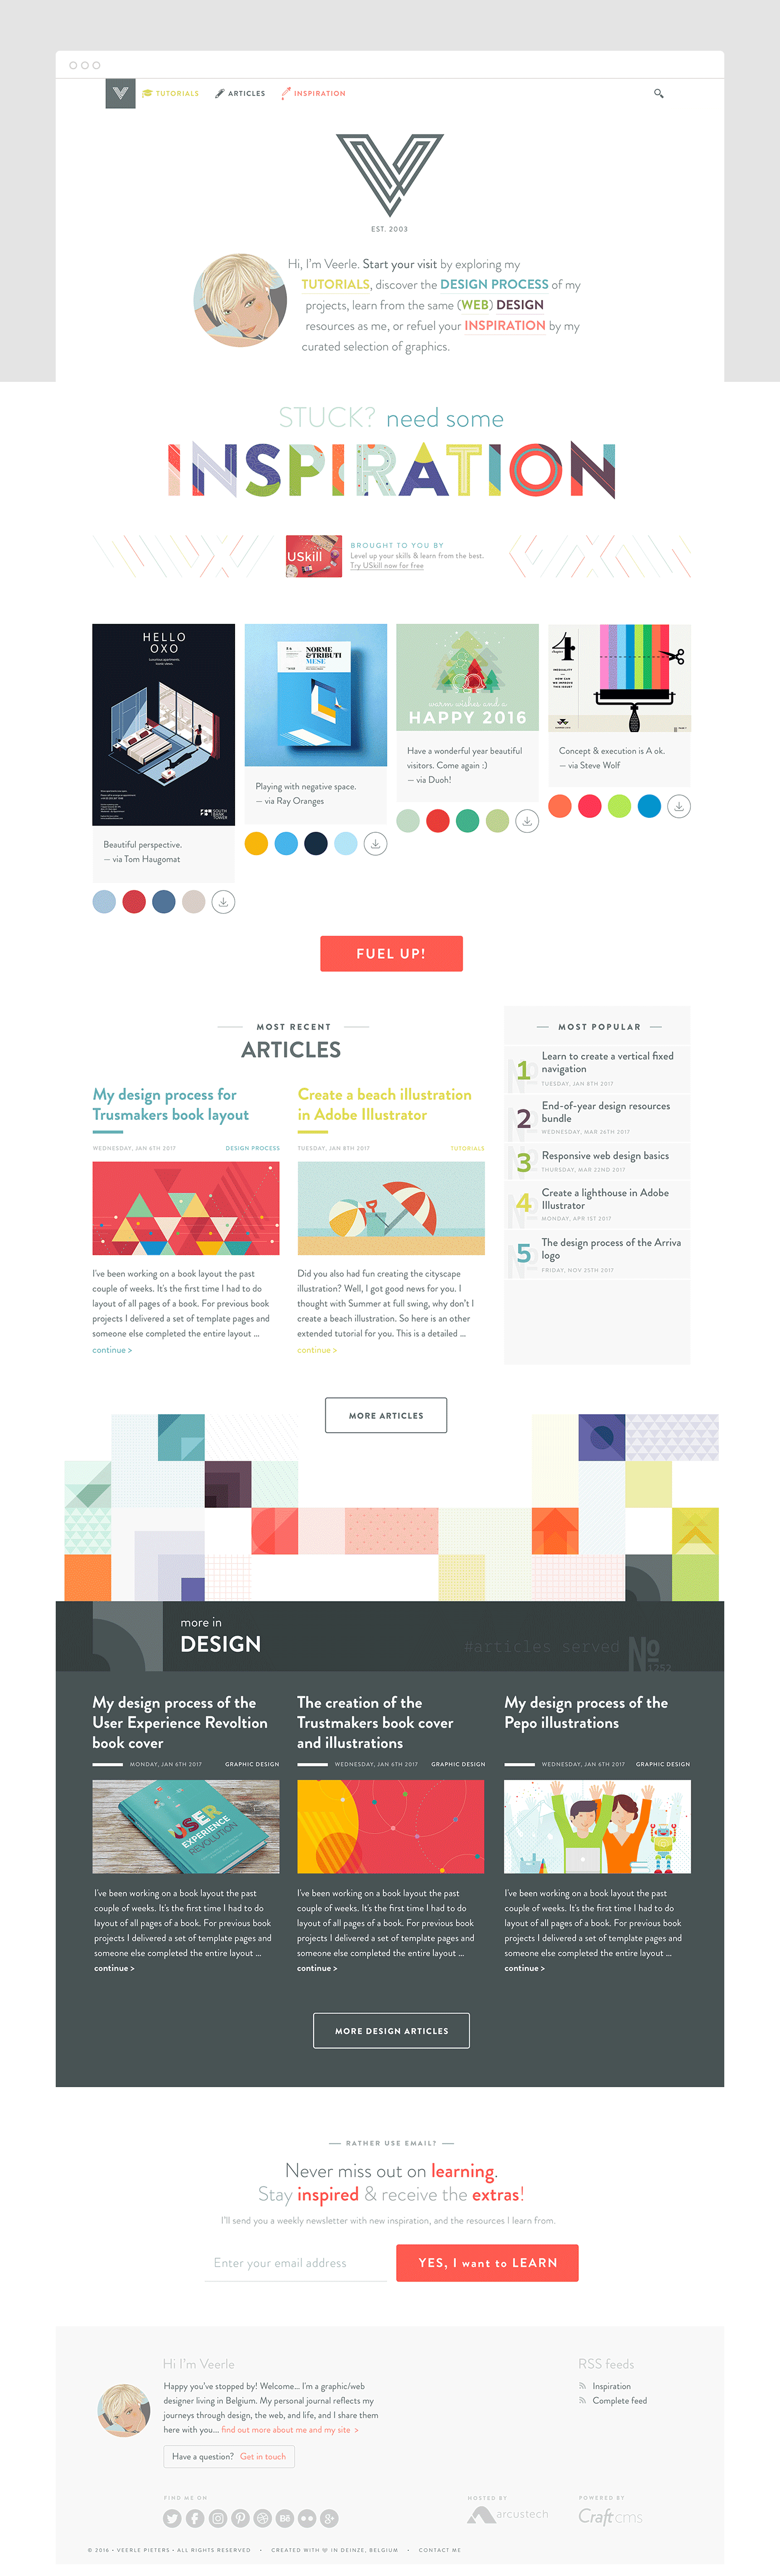 How the Design of My New Blog Came to Live